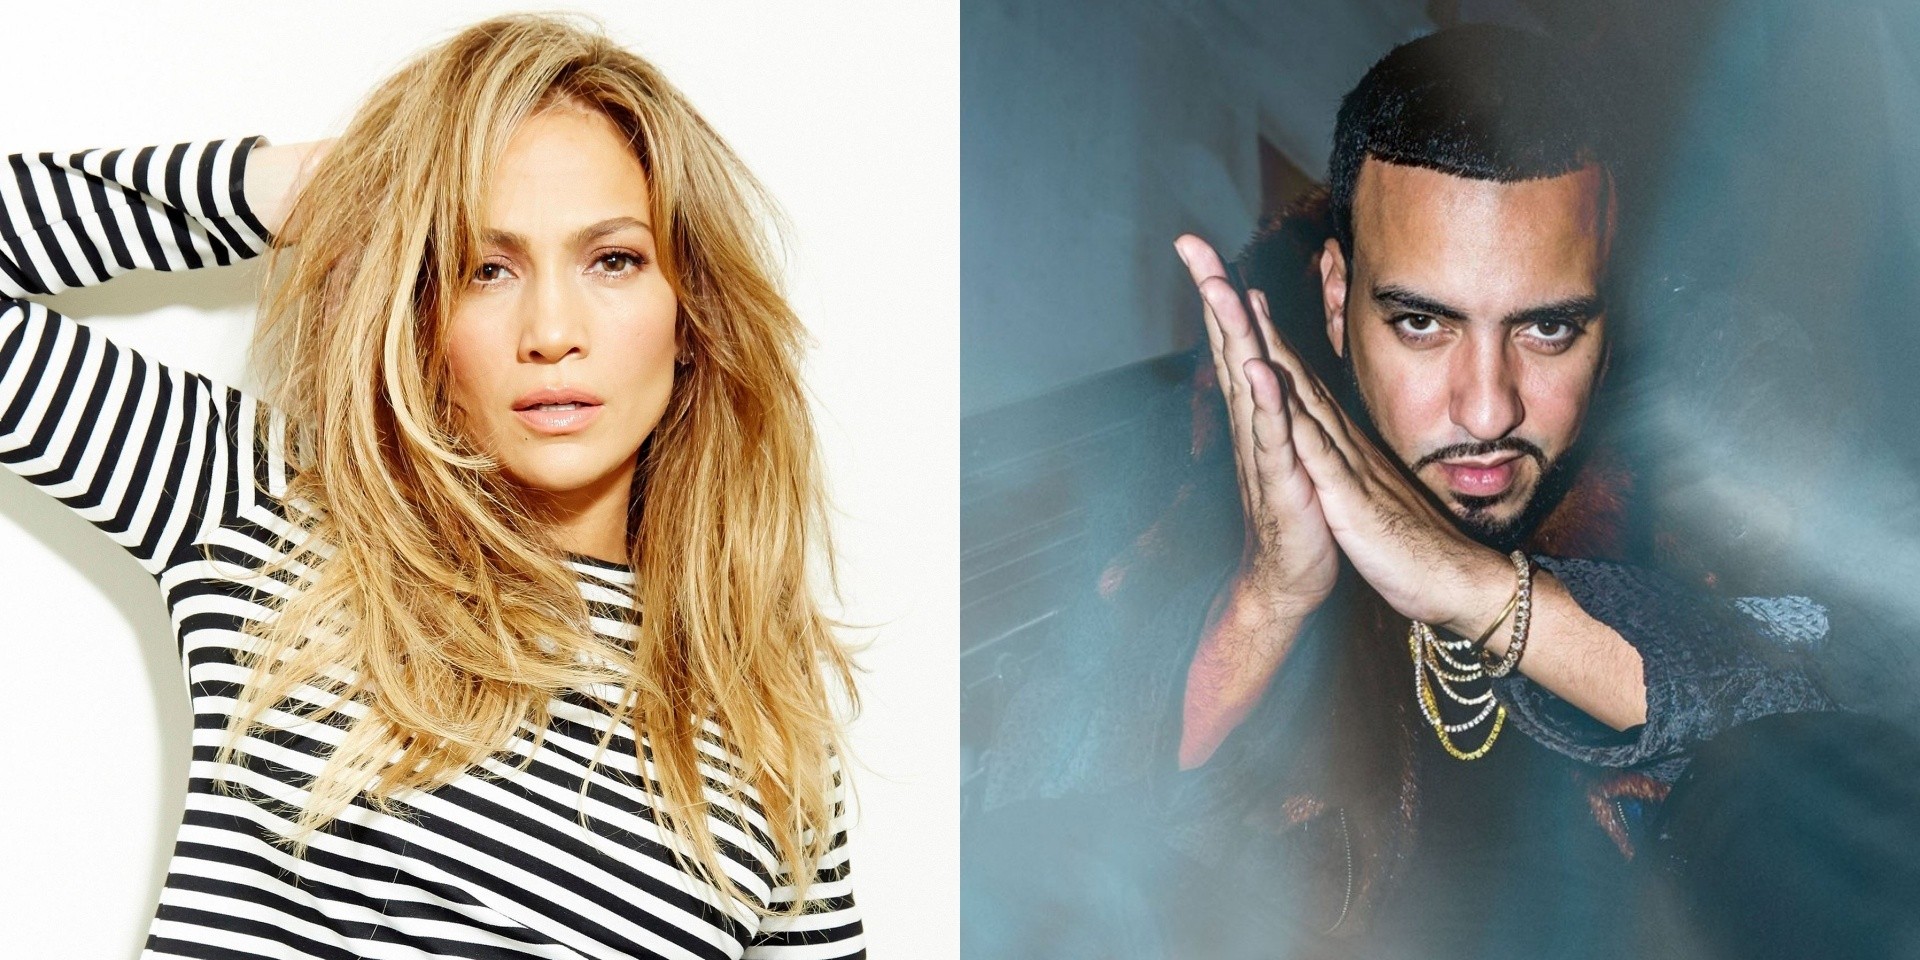 Jennifer Lopez releases new single with French Montana 'Medicine' – listen